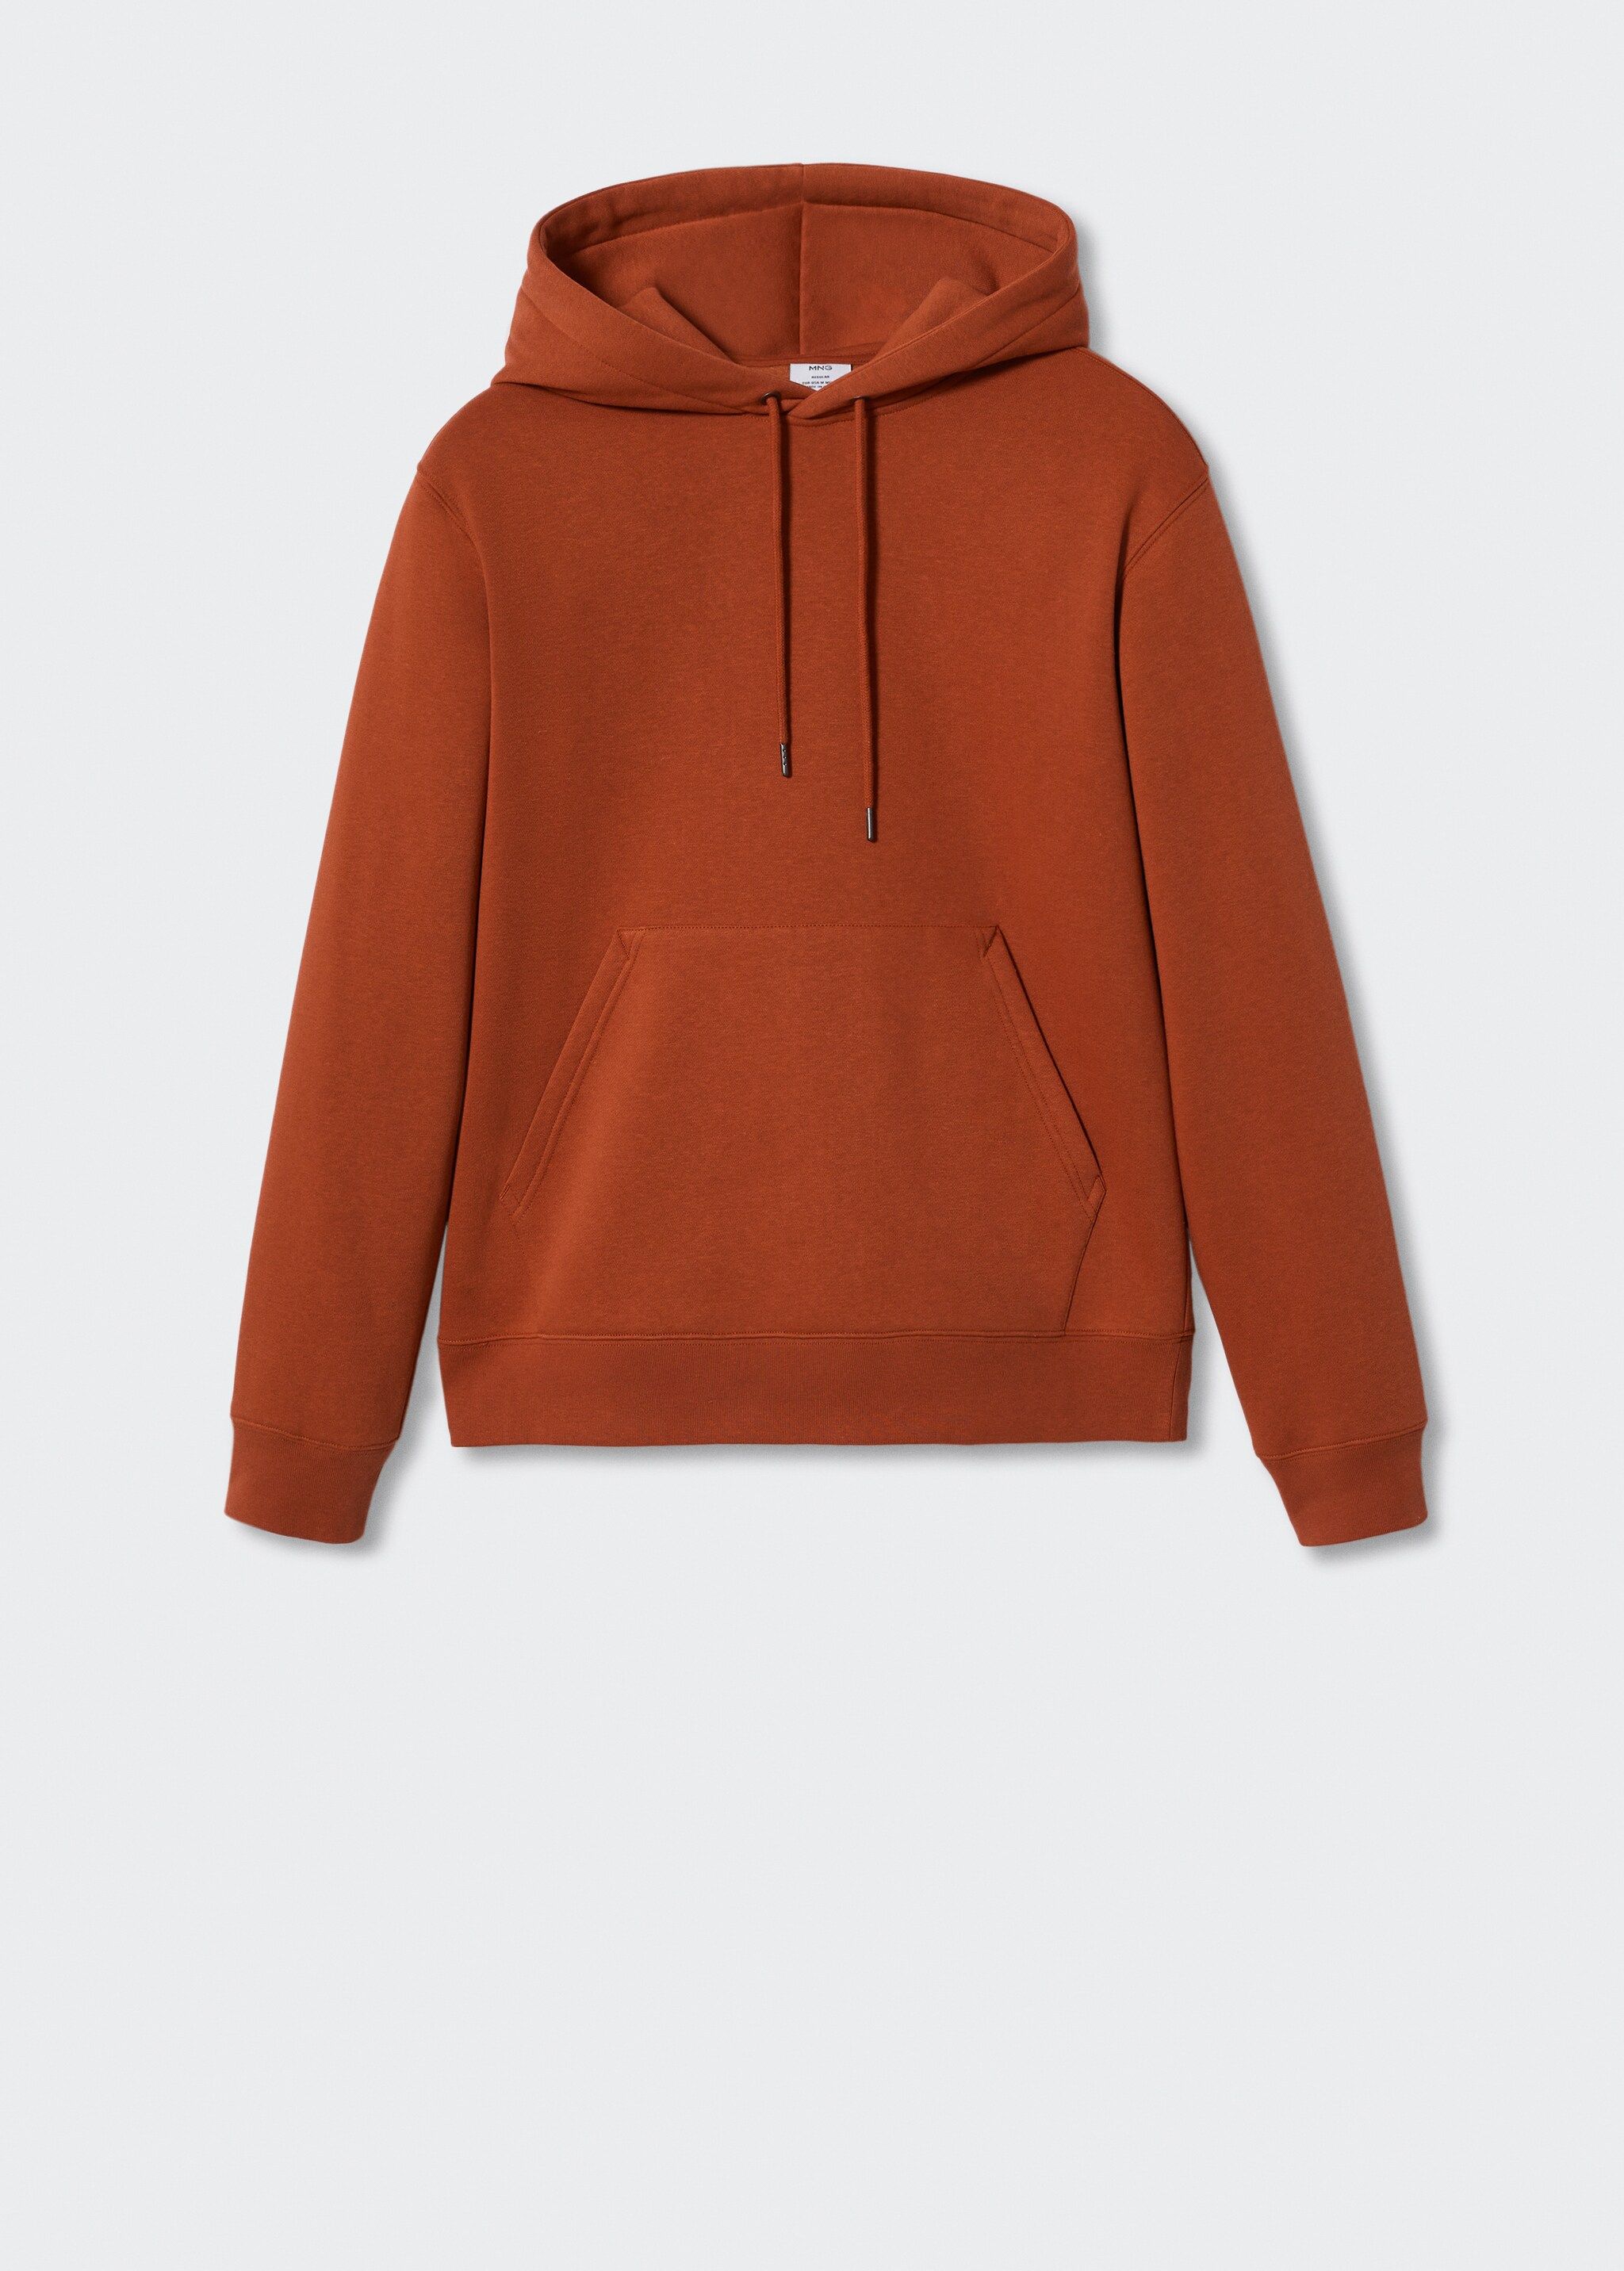 Hoodie cotton sweatshirt - Article without model